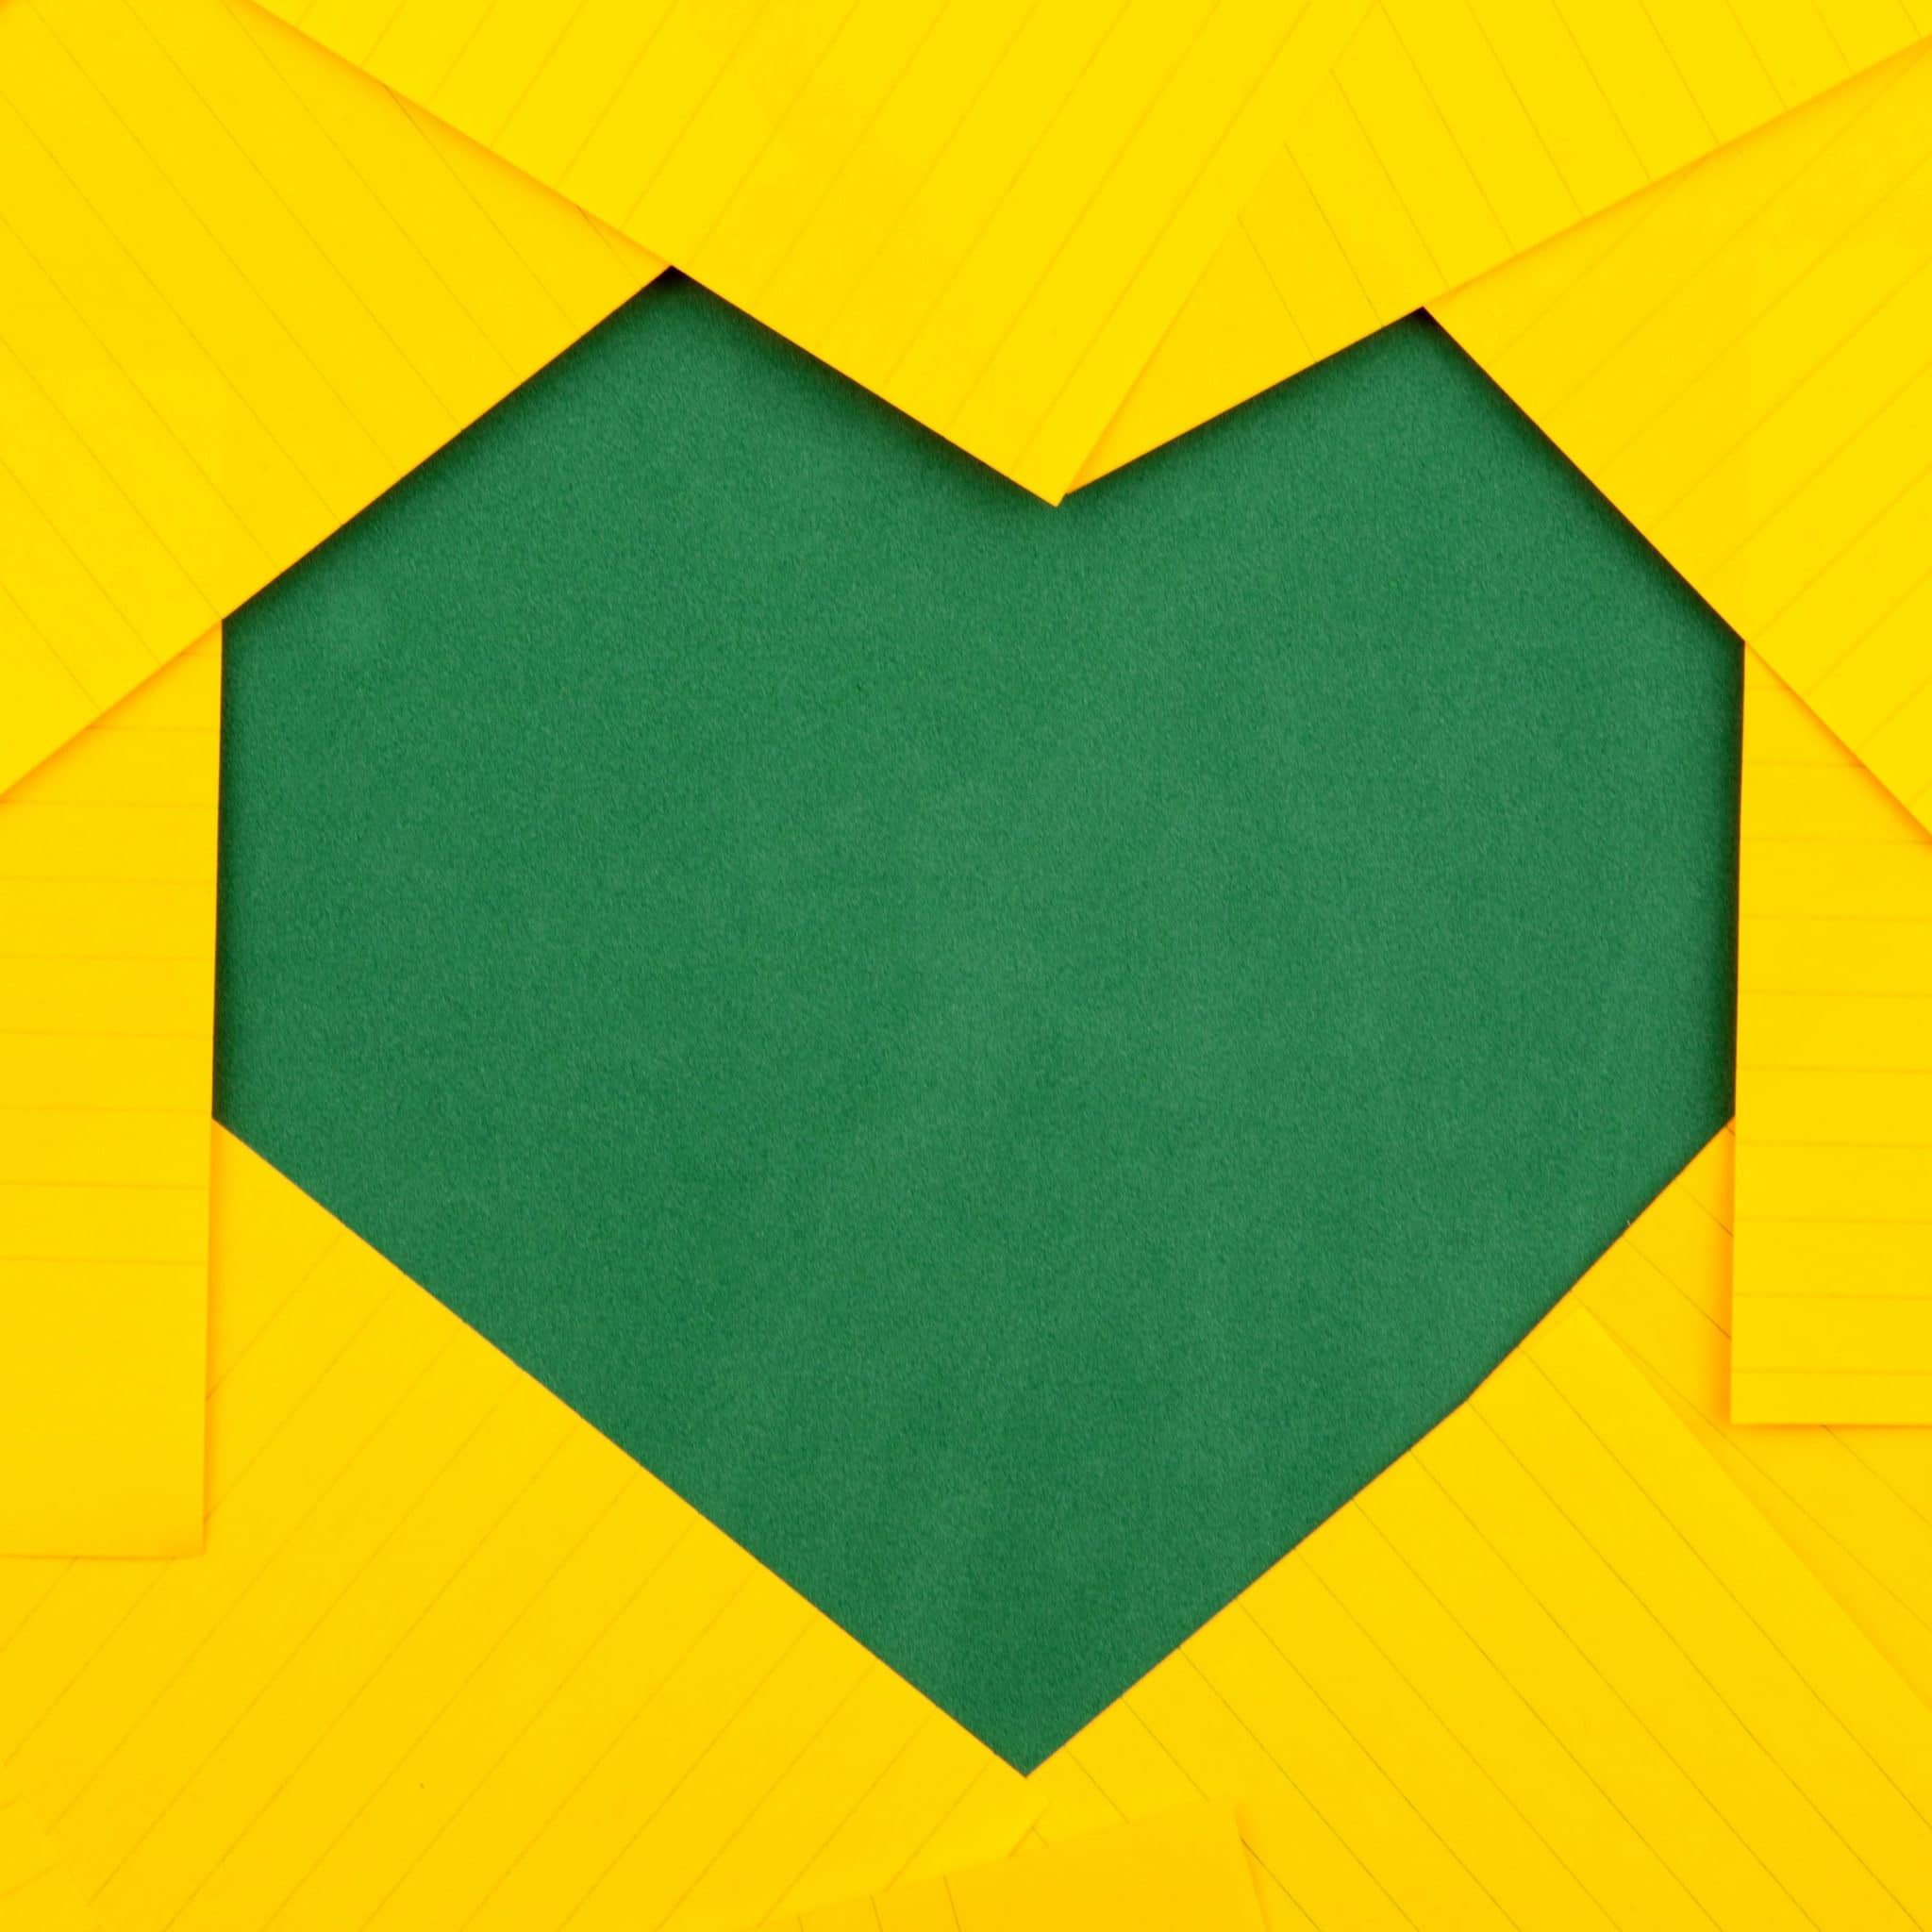 Green heart on top of yellow background